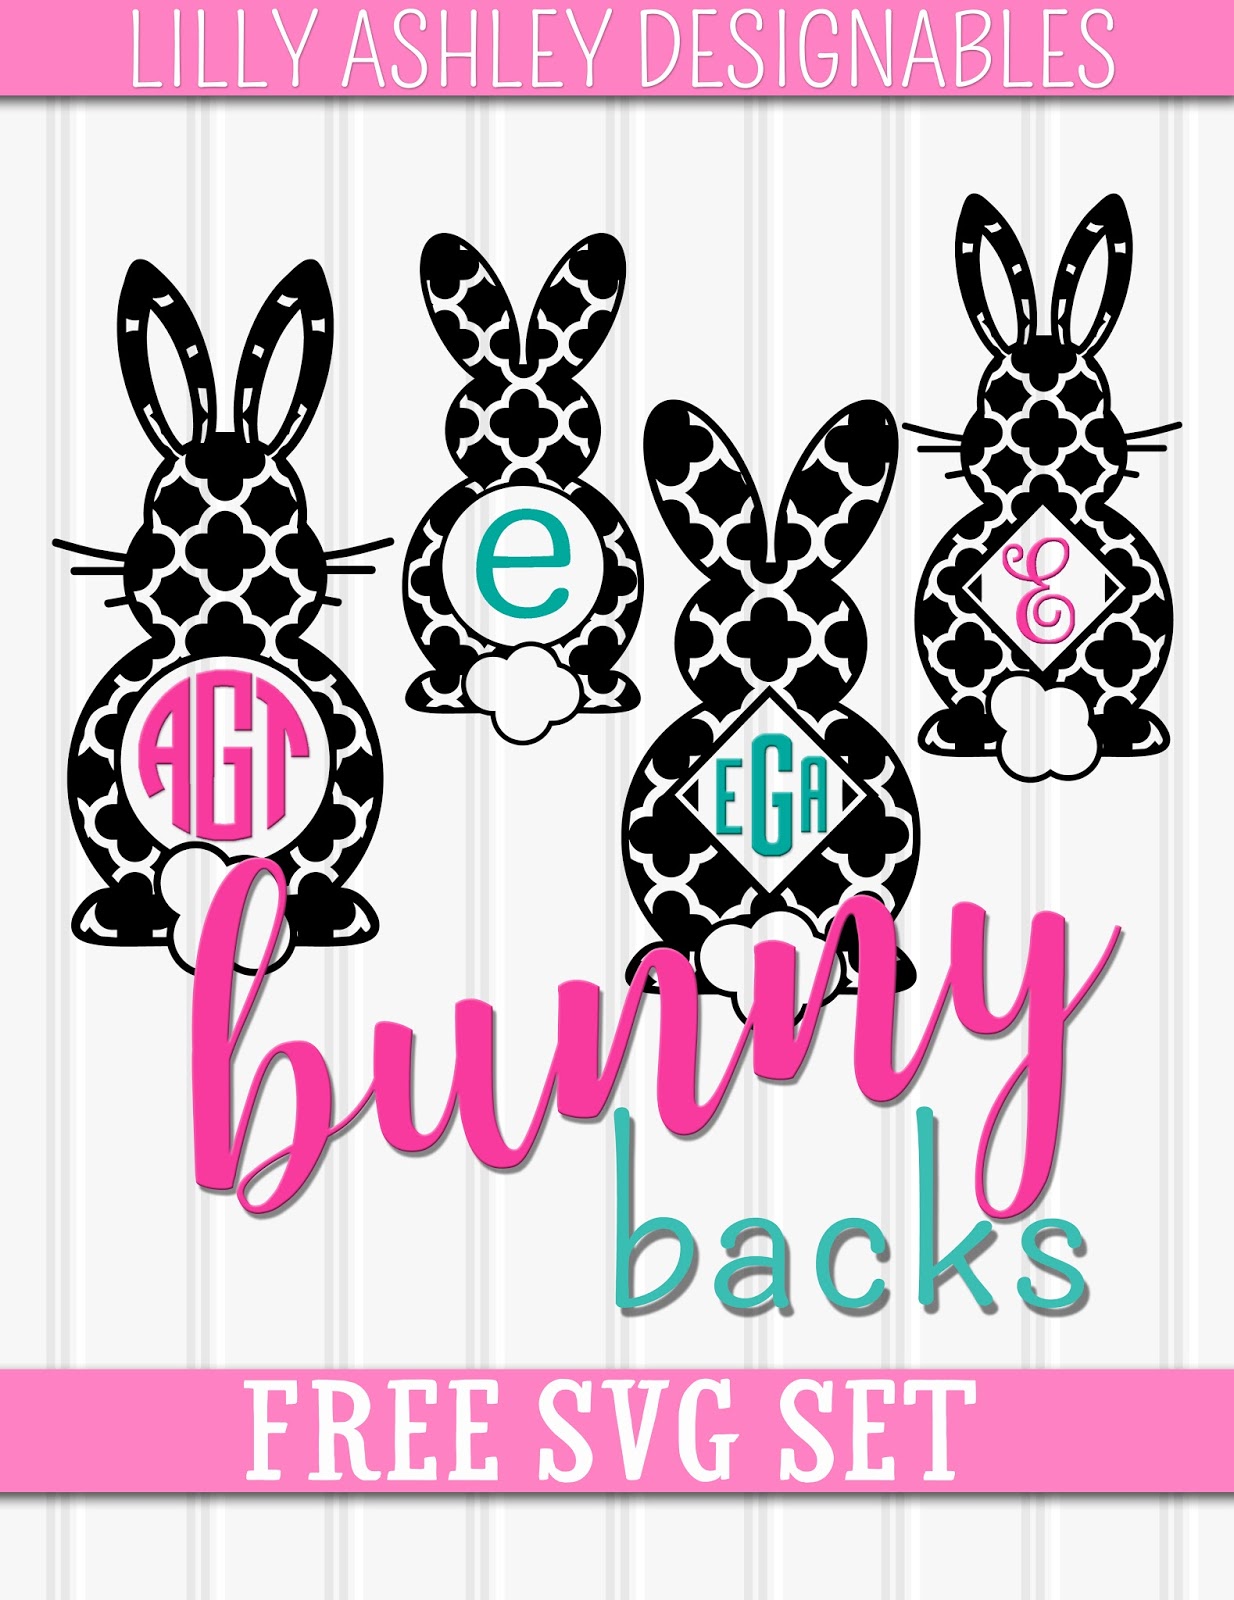 Download Make it Create by LillyAshley...Freebie Downloads: Free Easter SVG Set for Monograms